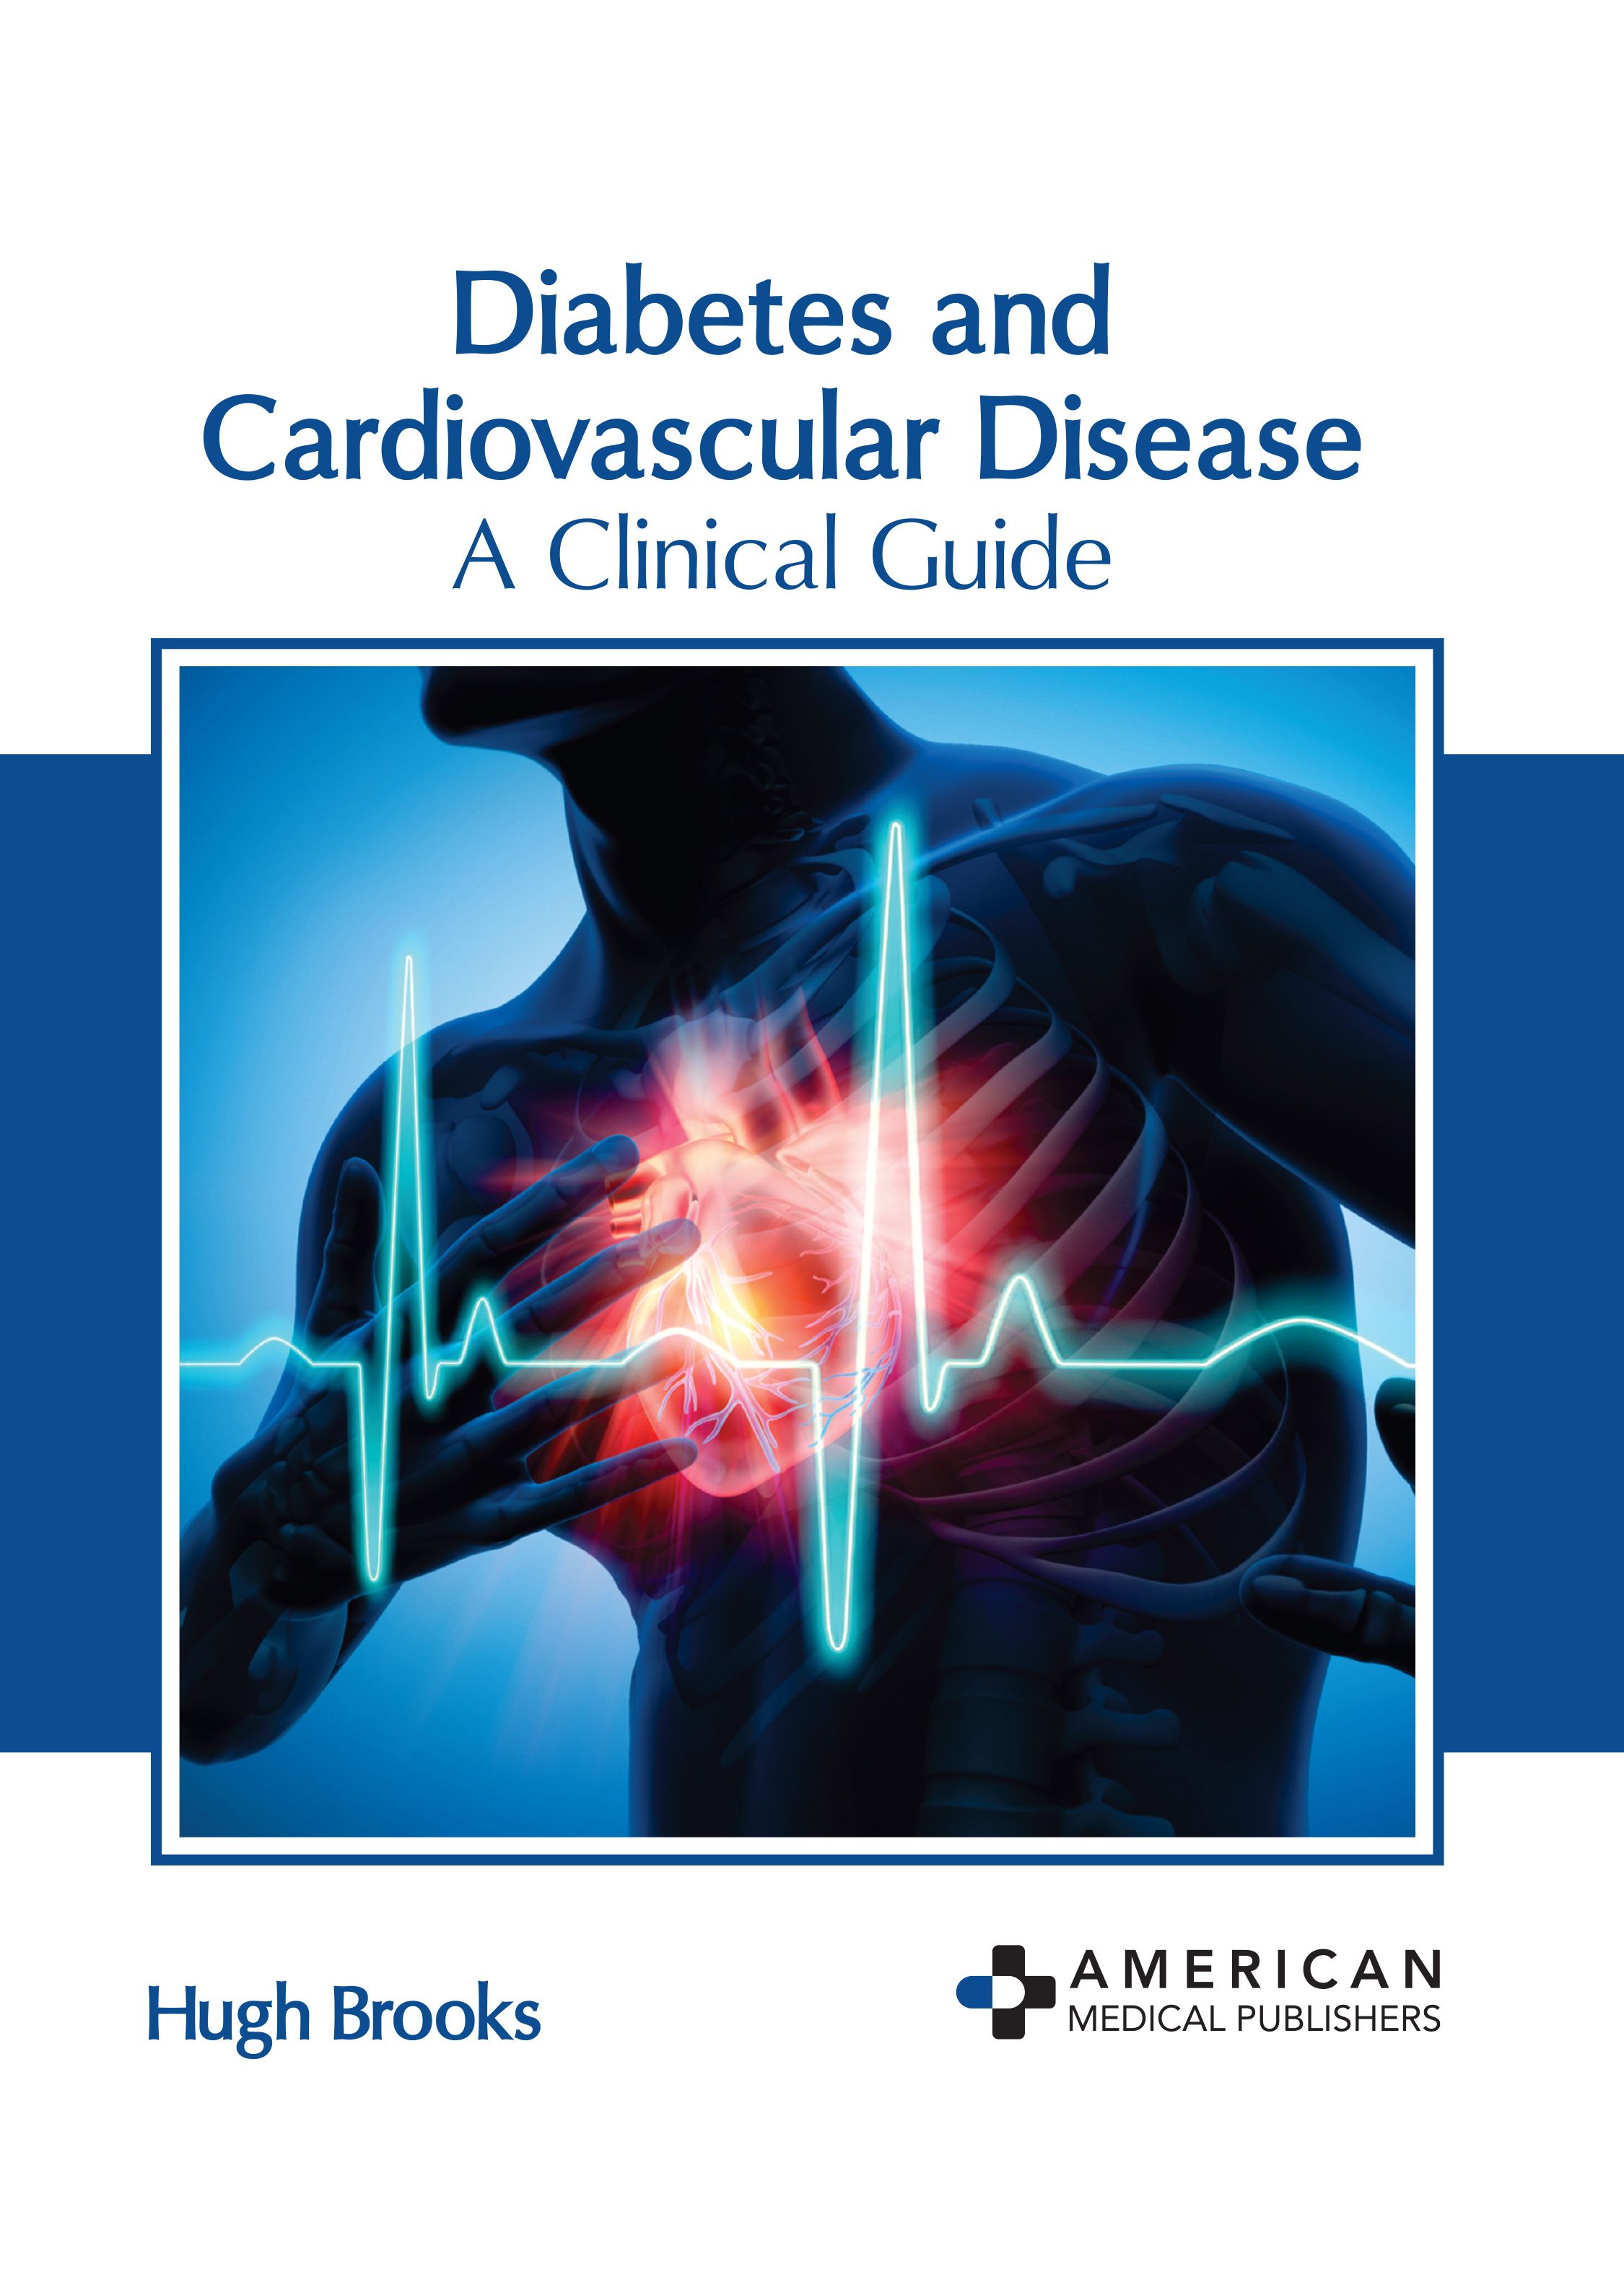 DIABETES AND CARDIOVASCULAR DISEASE: A CLINICAL GUIDE